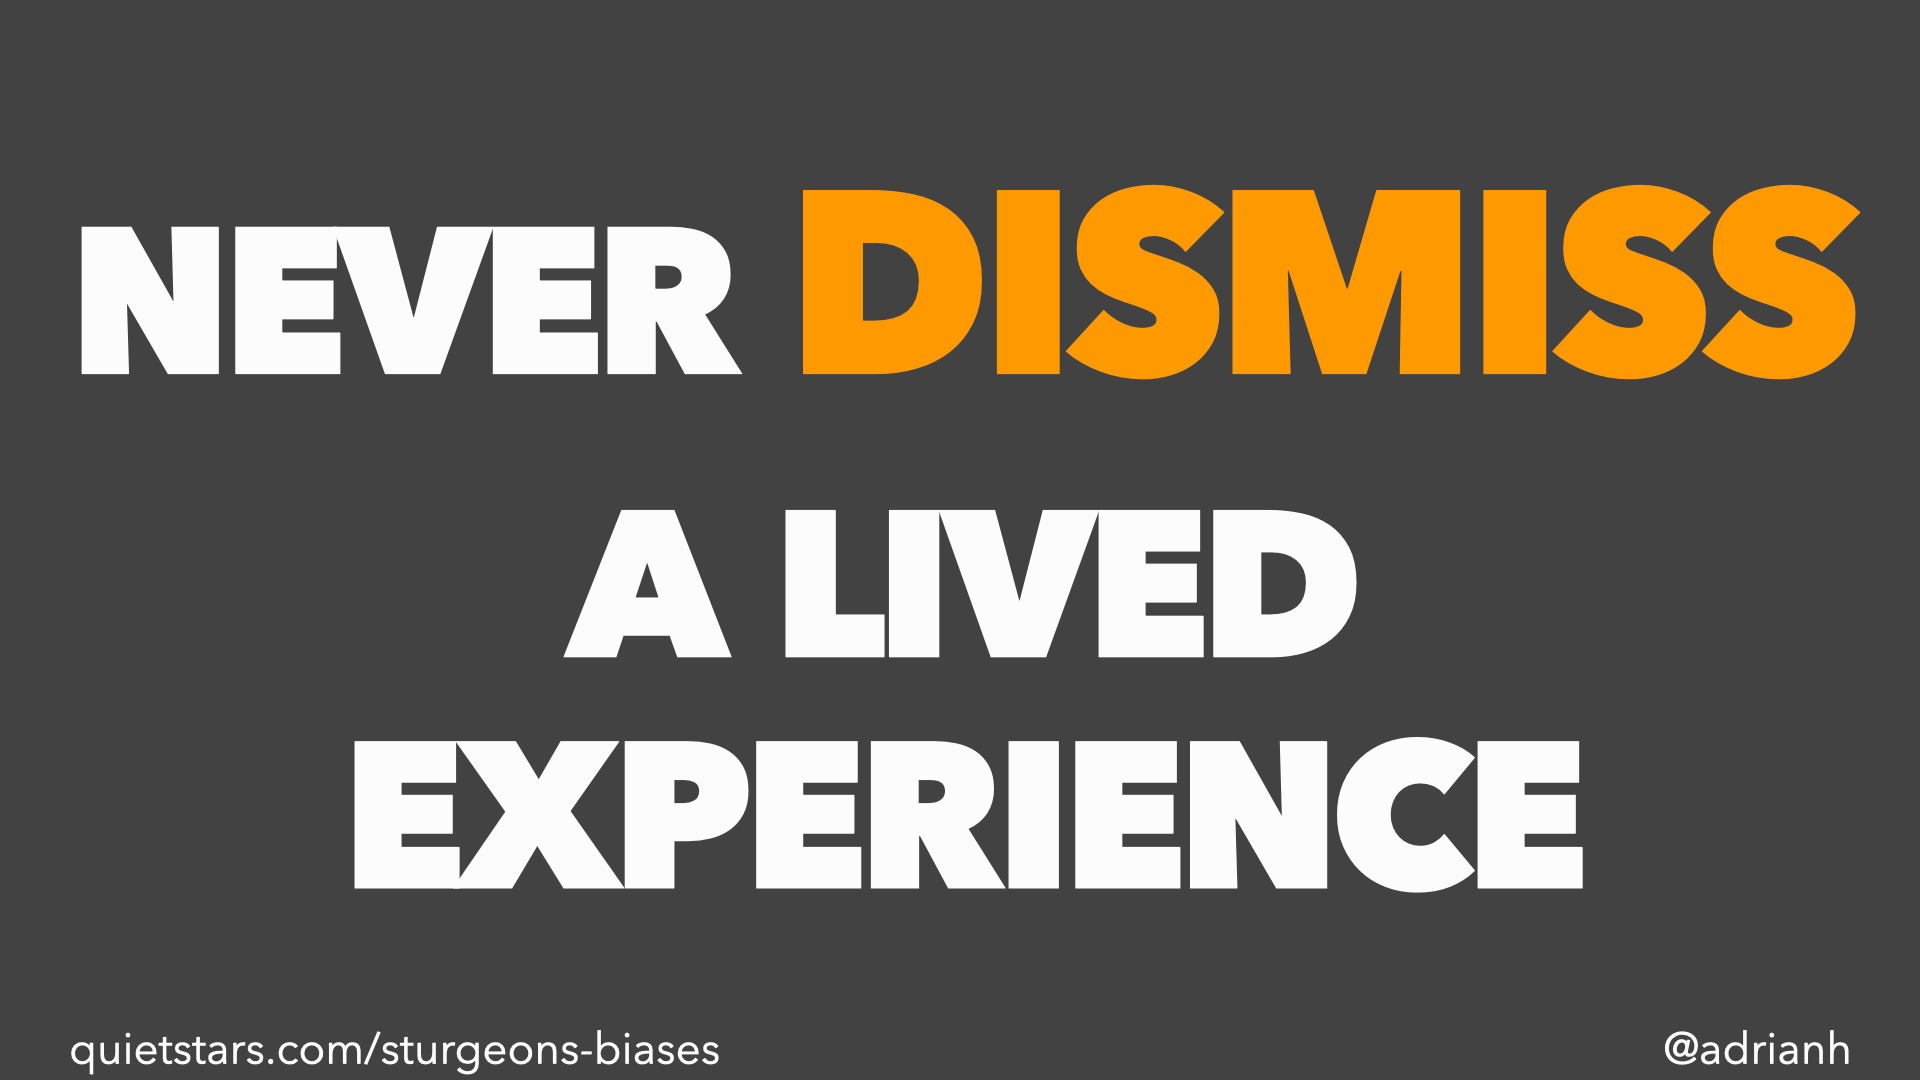 Never dismiss a lived experience